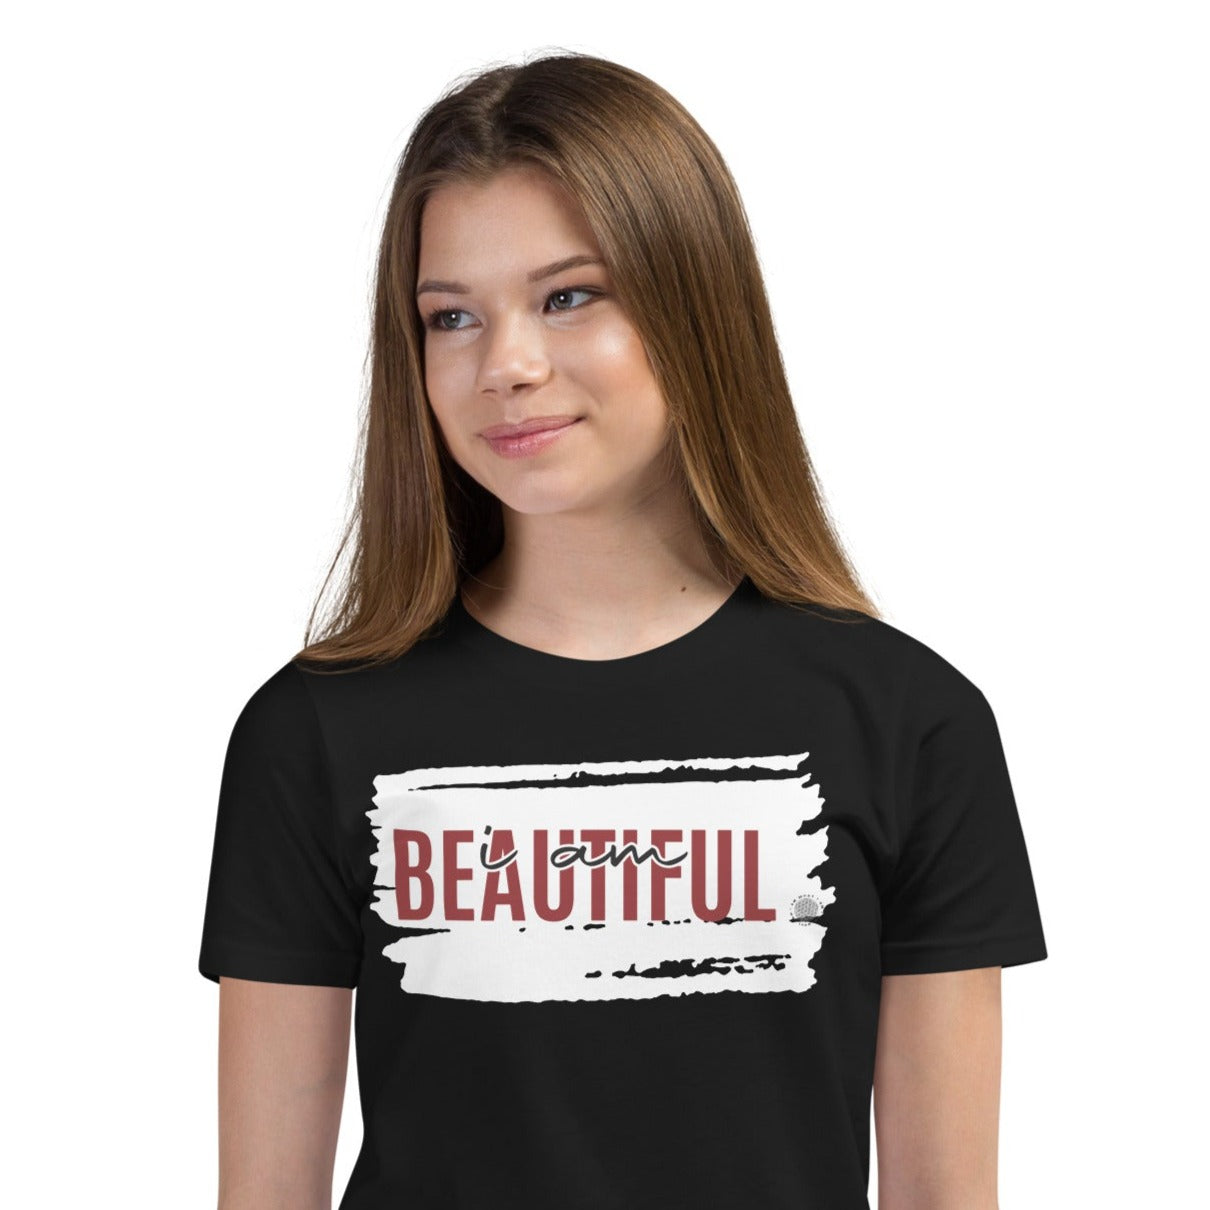 Our ‘I Am Beautiful’ affirmation youth t-shirt will compliment your son or daughter who has been a bundle of joy and beauty since birth.  Positive affirmations for students can help build their confidence.